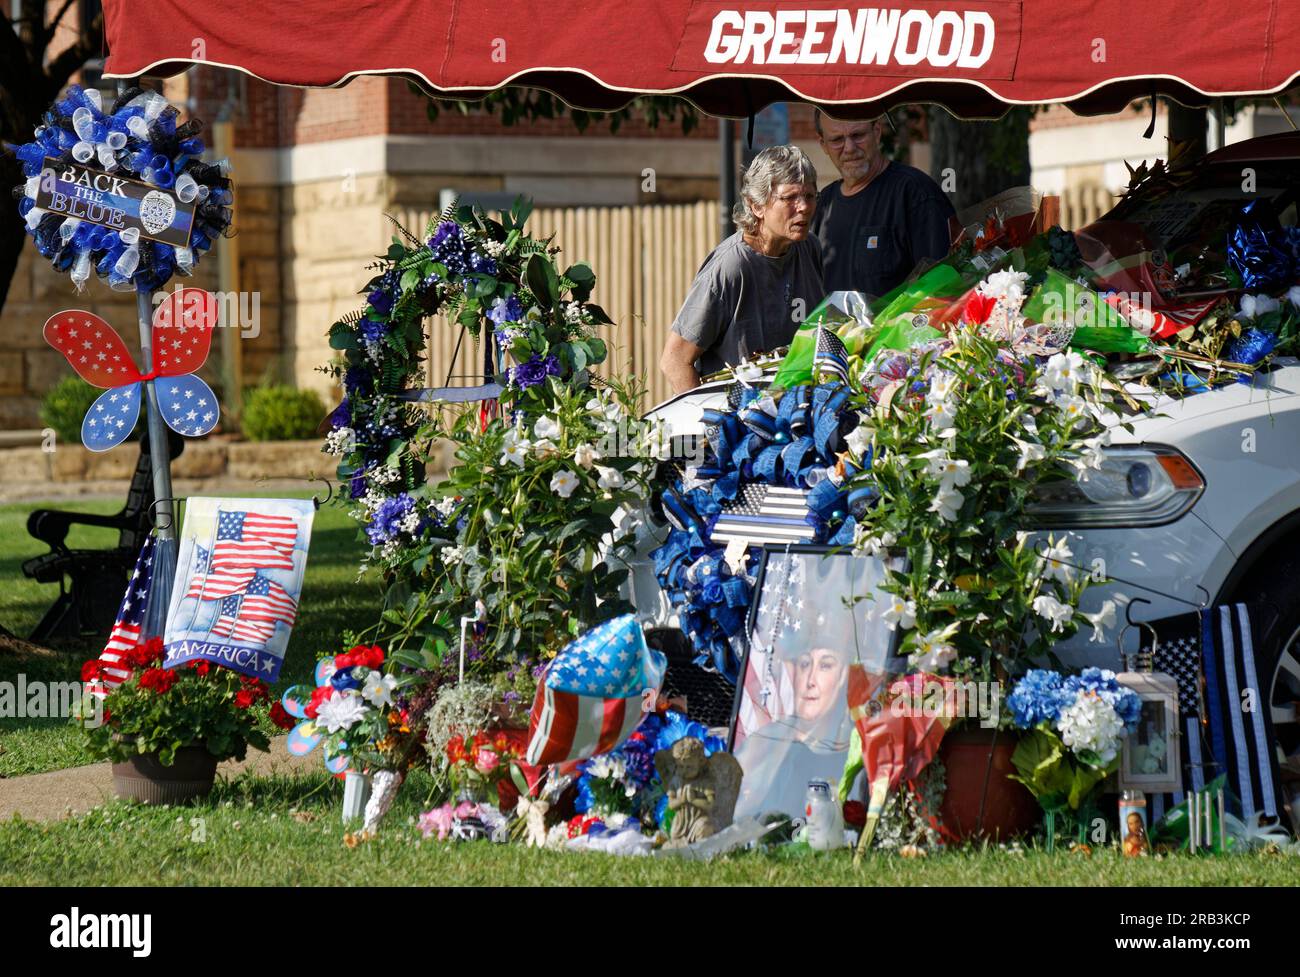 A pair of visitors examine flowers and memorial tributes piled on and around the Dodge Durango patrol vehicle of Tell City Police Department Sgt. Heather J. Glenn on Thursday, July 6, 2023 near city hall in Tell City, Troy Township, Perry County, IN, USA. Glenn, 47, was shot and killed July 3 while trying to arrest a domestic violence suspect at a local hospital, becoming the first line-of-duty death in the Tell City Police Department's nearly 165-year history and second Indiana police officer to be killed in the line of duty in less than a week. (Apex MediaWire Photo by Billy Suratt) Stock Photo